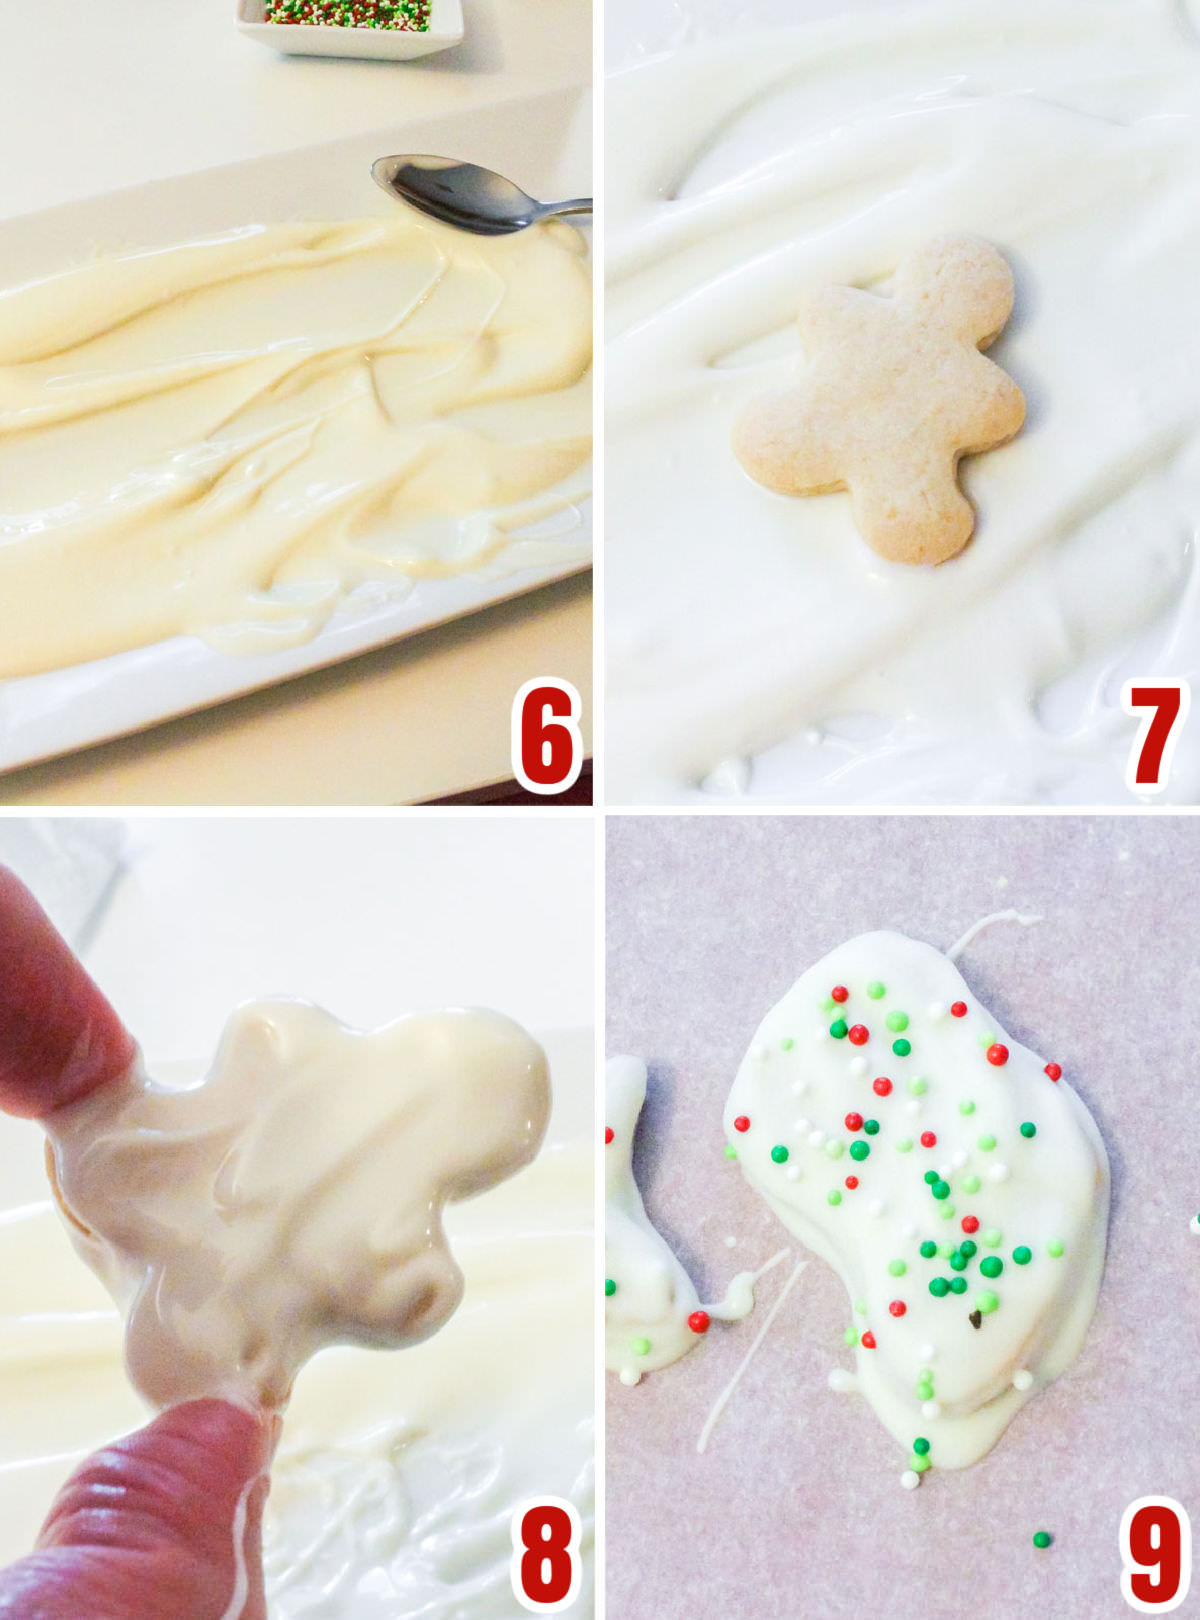 Collage image showing the steps for covering the small sugar cookie in white chocolate.